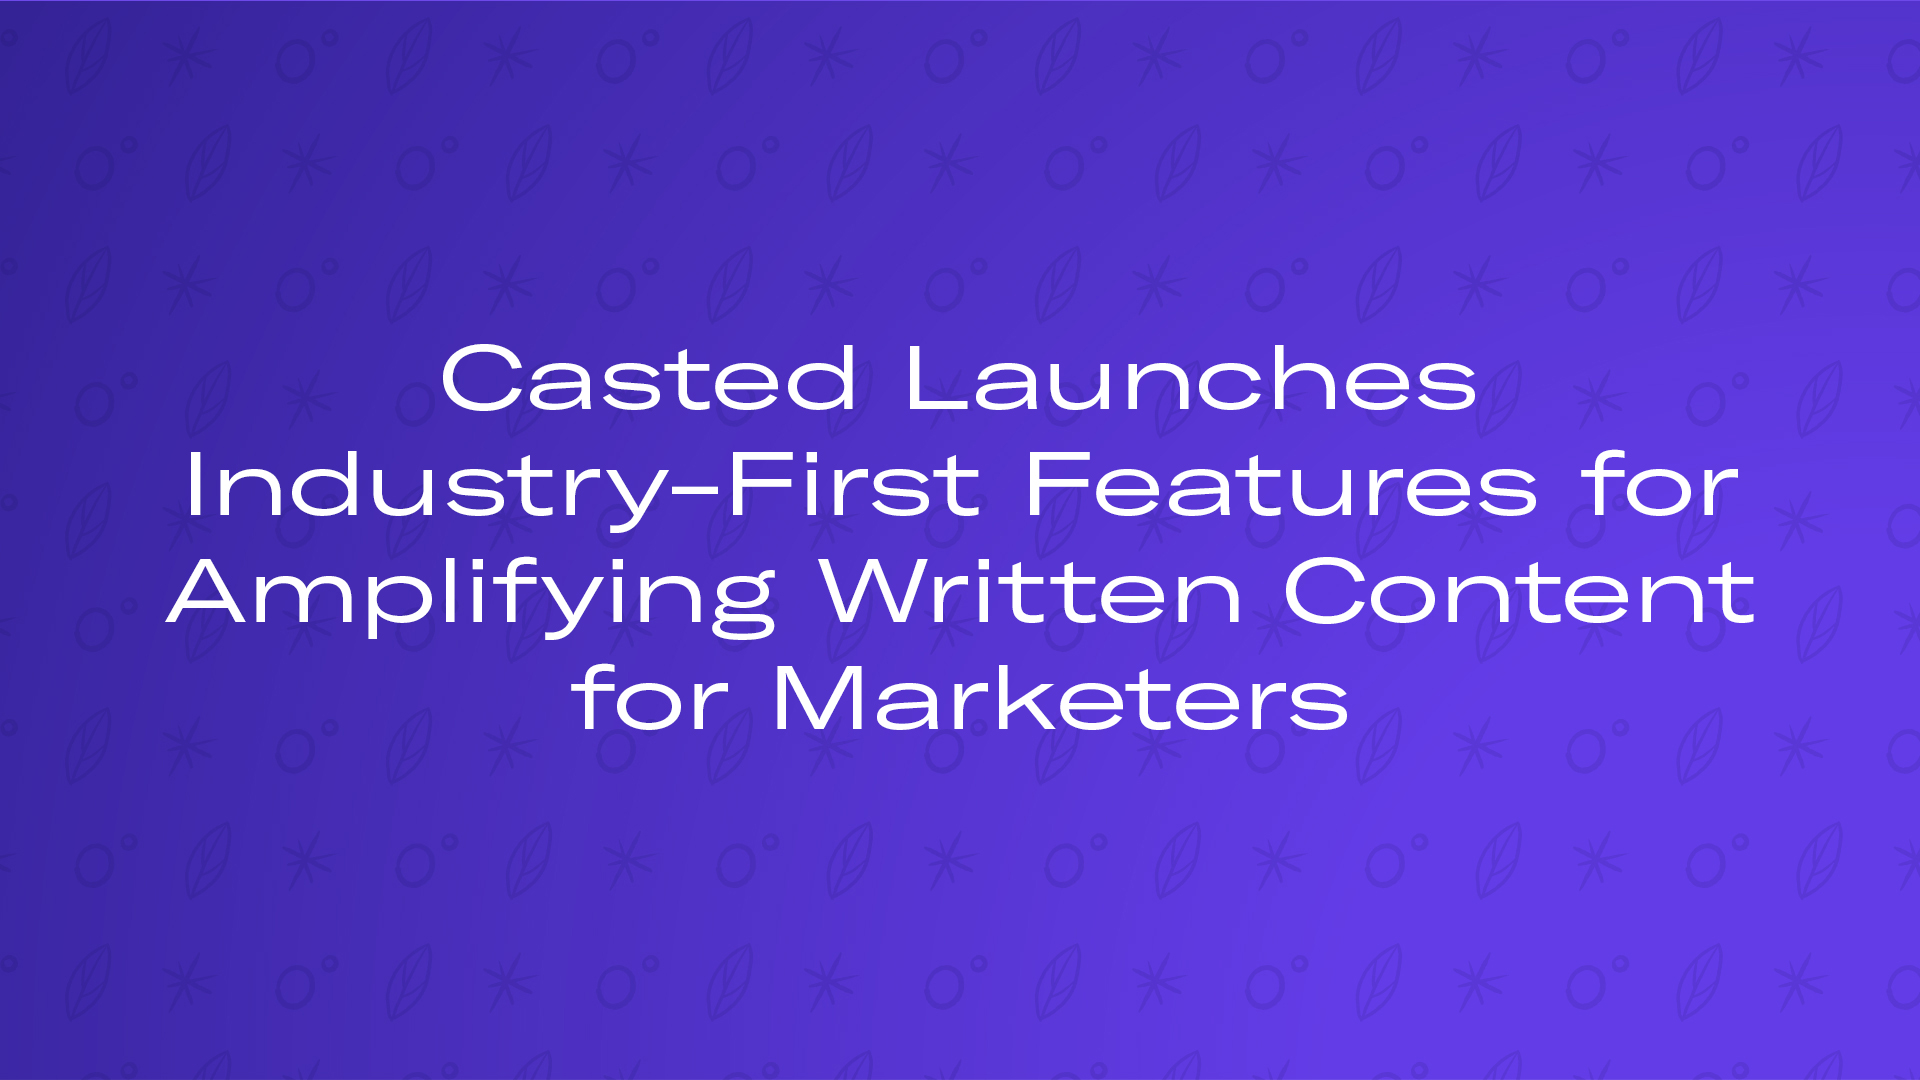 Casted Launches Industry-First Features for Amplifying Written Content for Marketers